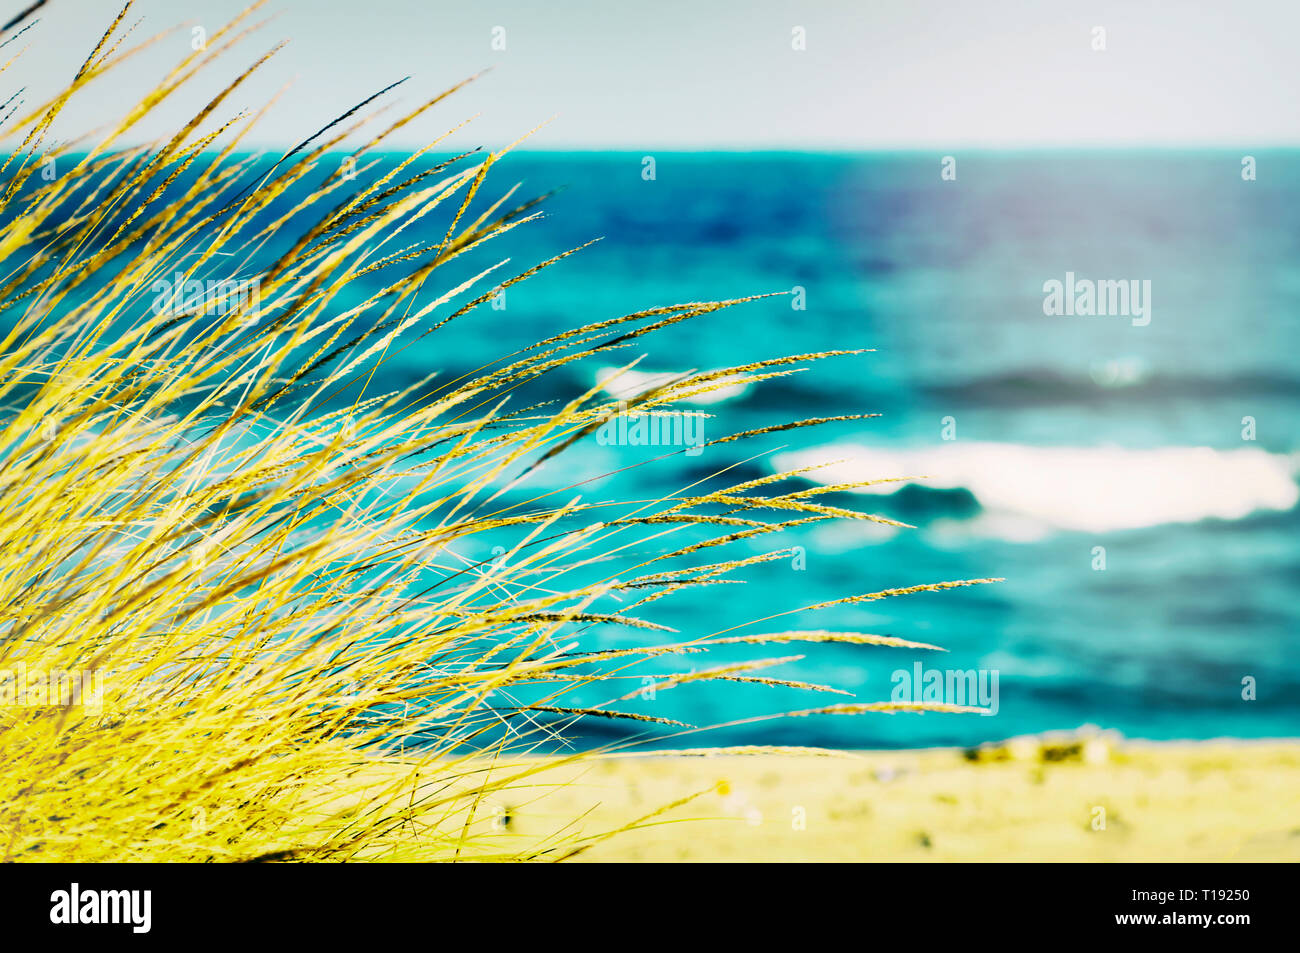 Seagrass on a beach at the Aegean Sea in Greece Stock Photo